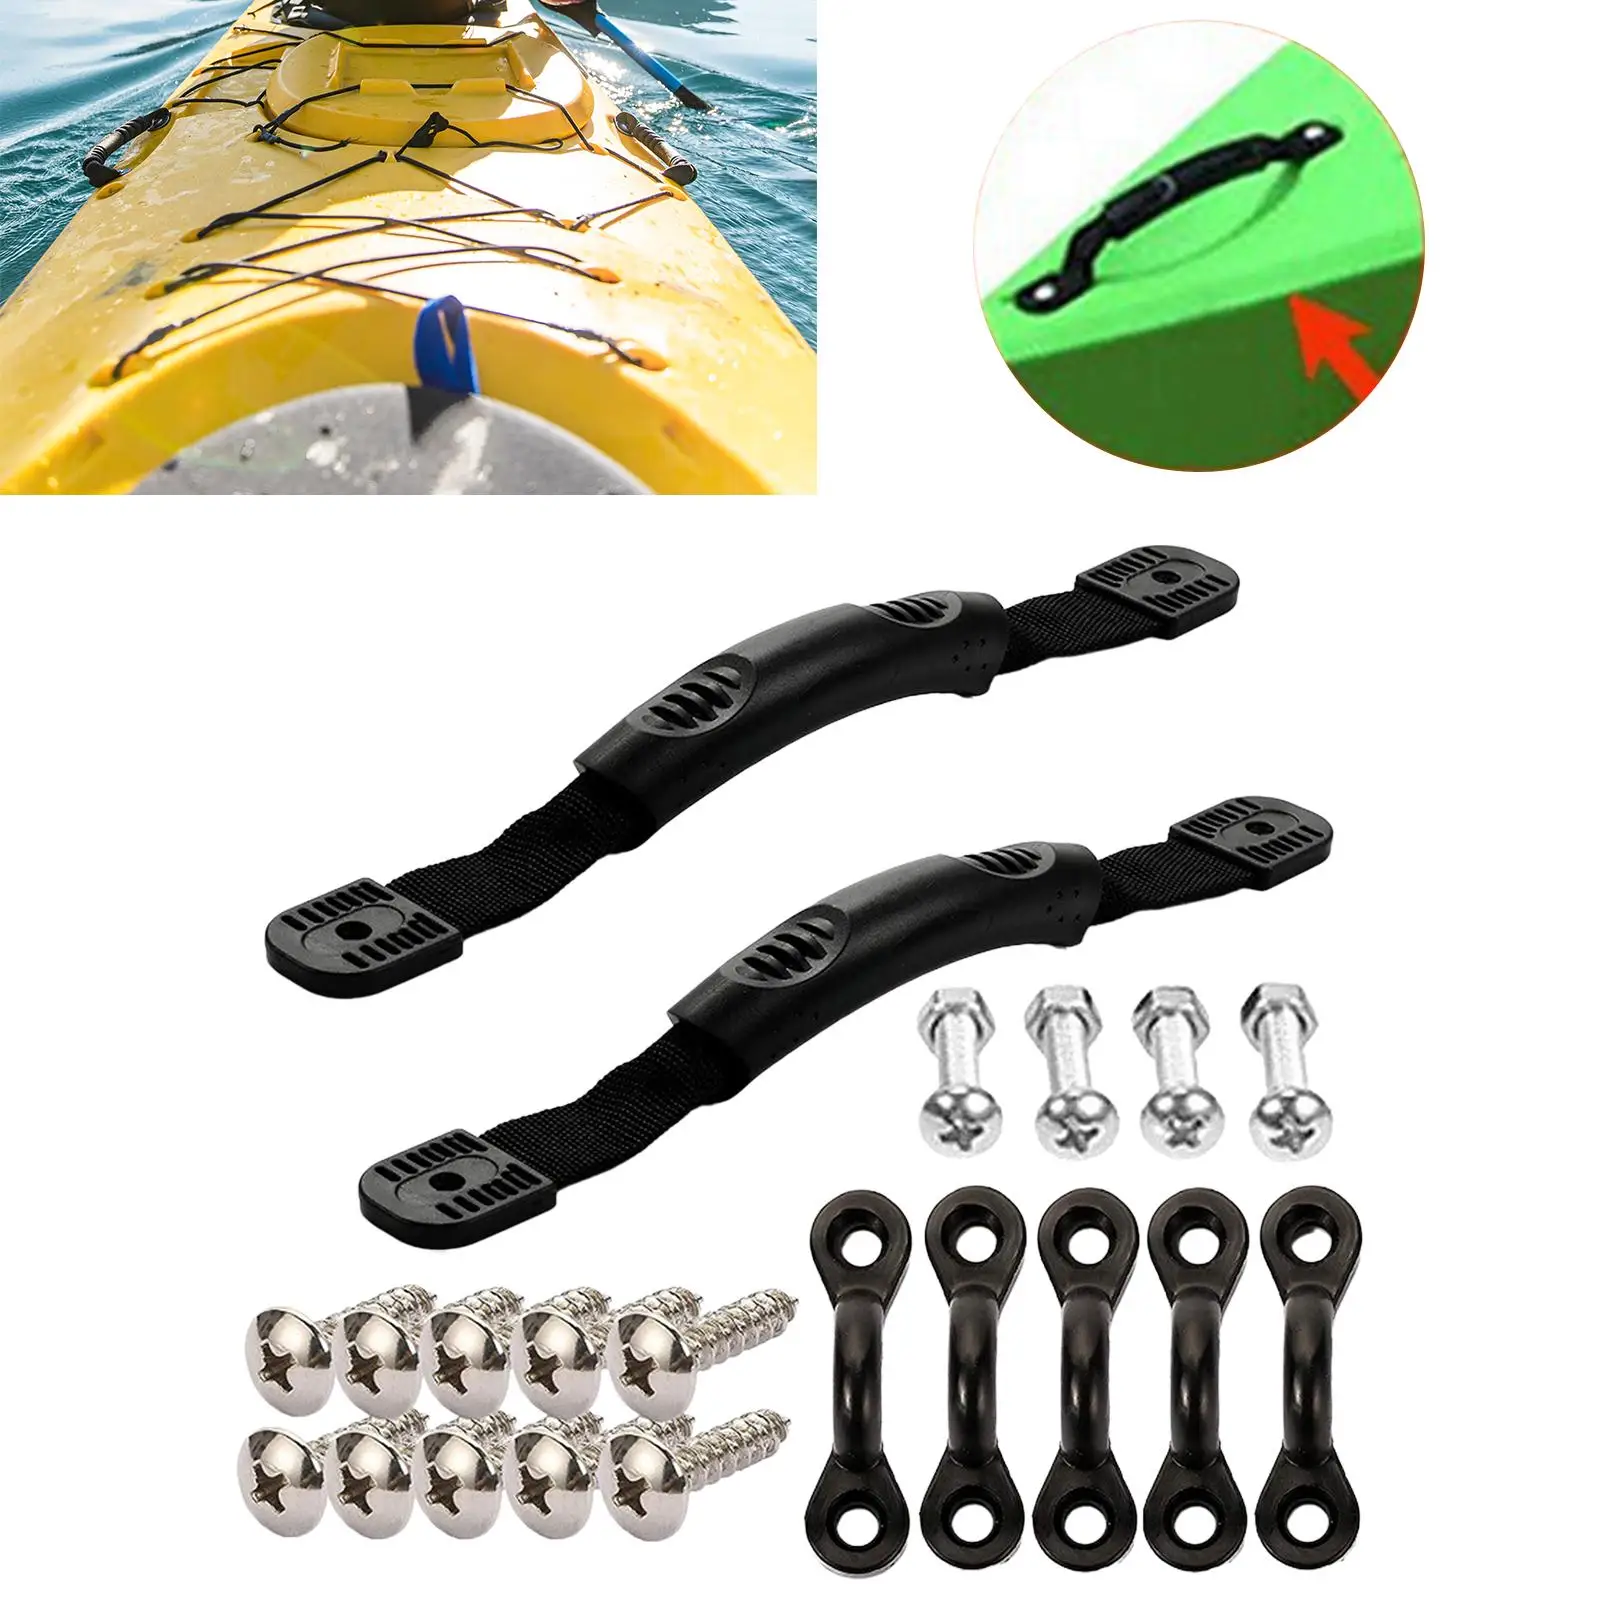 Kayak Canoe Carry Handles Comfortable Gripping Kayak Handle for Boats Canoes